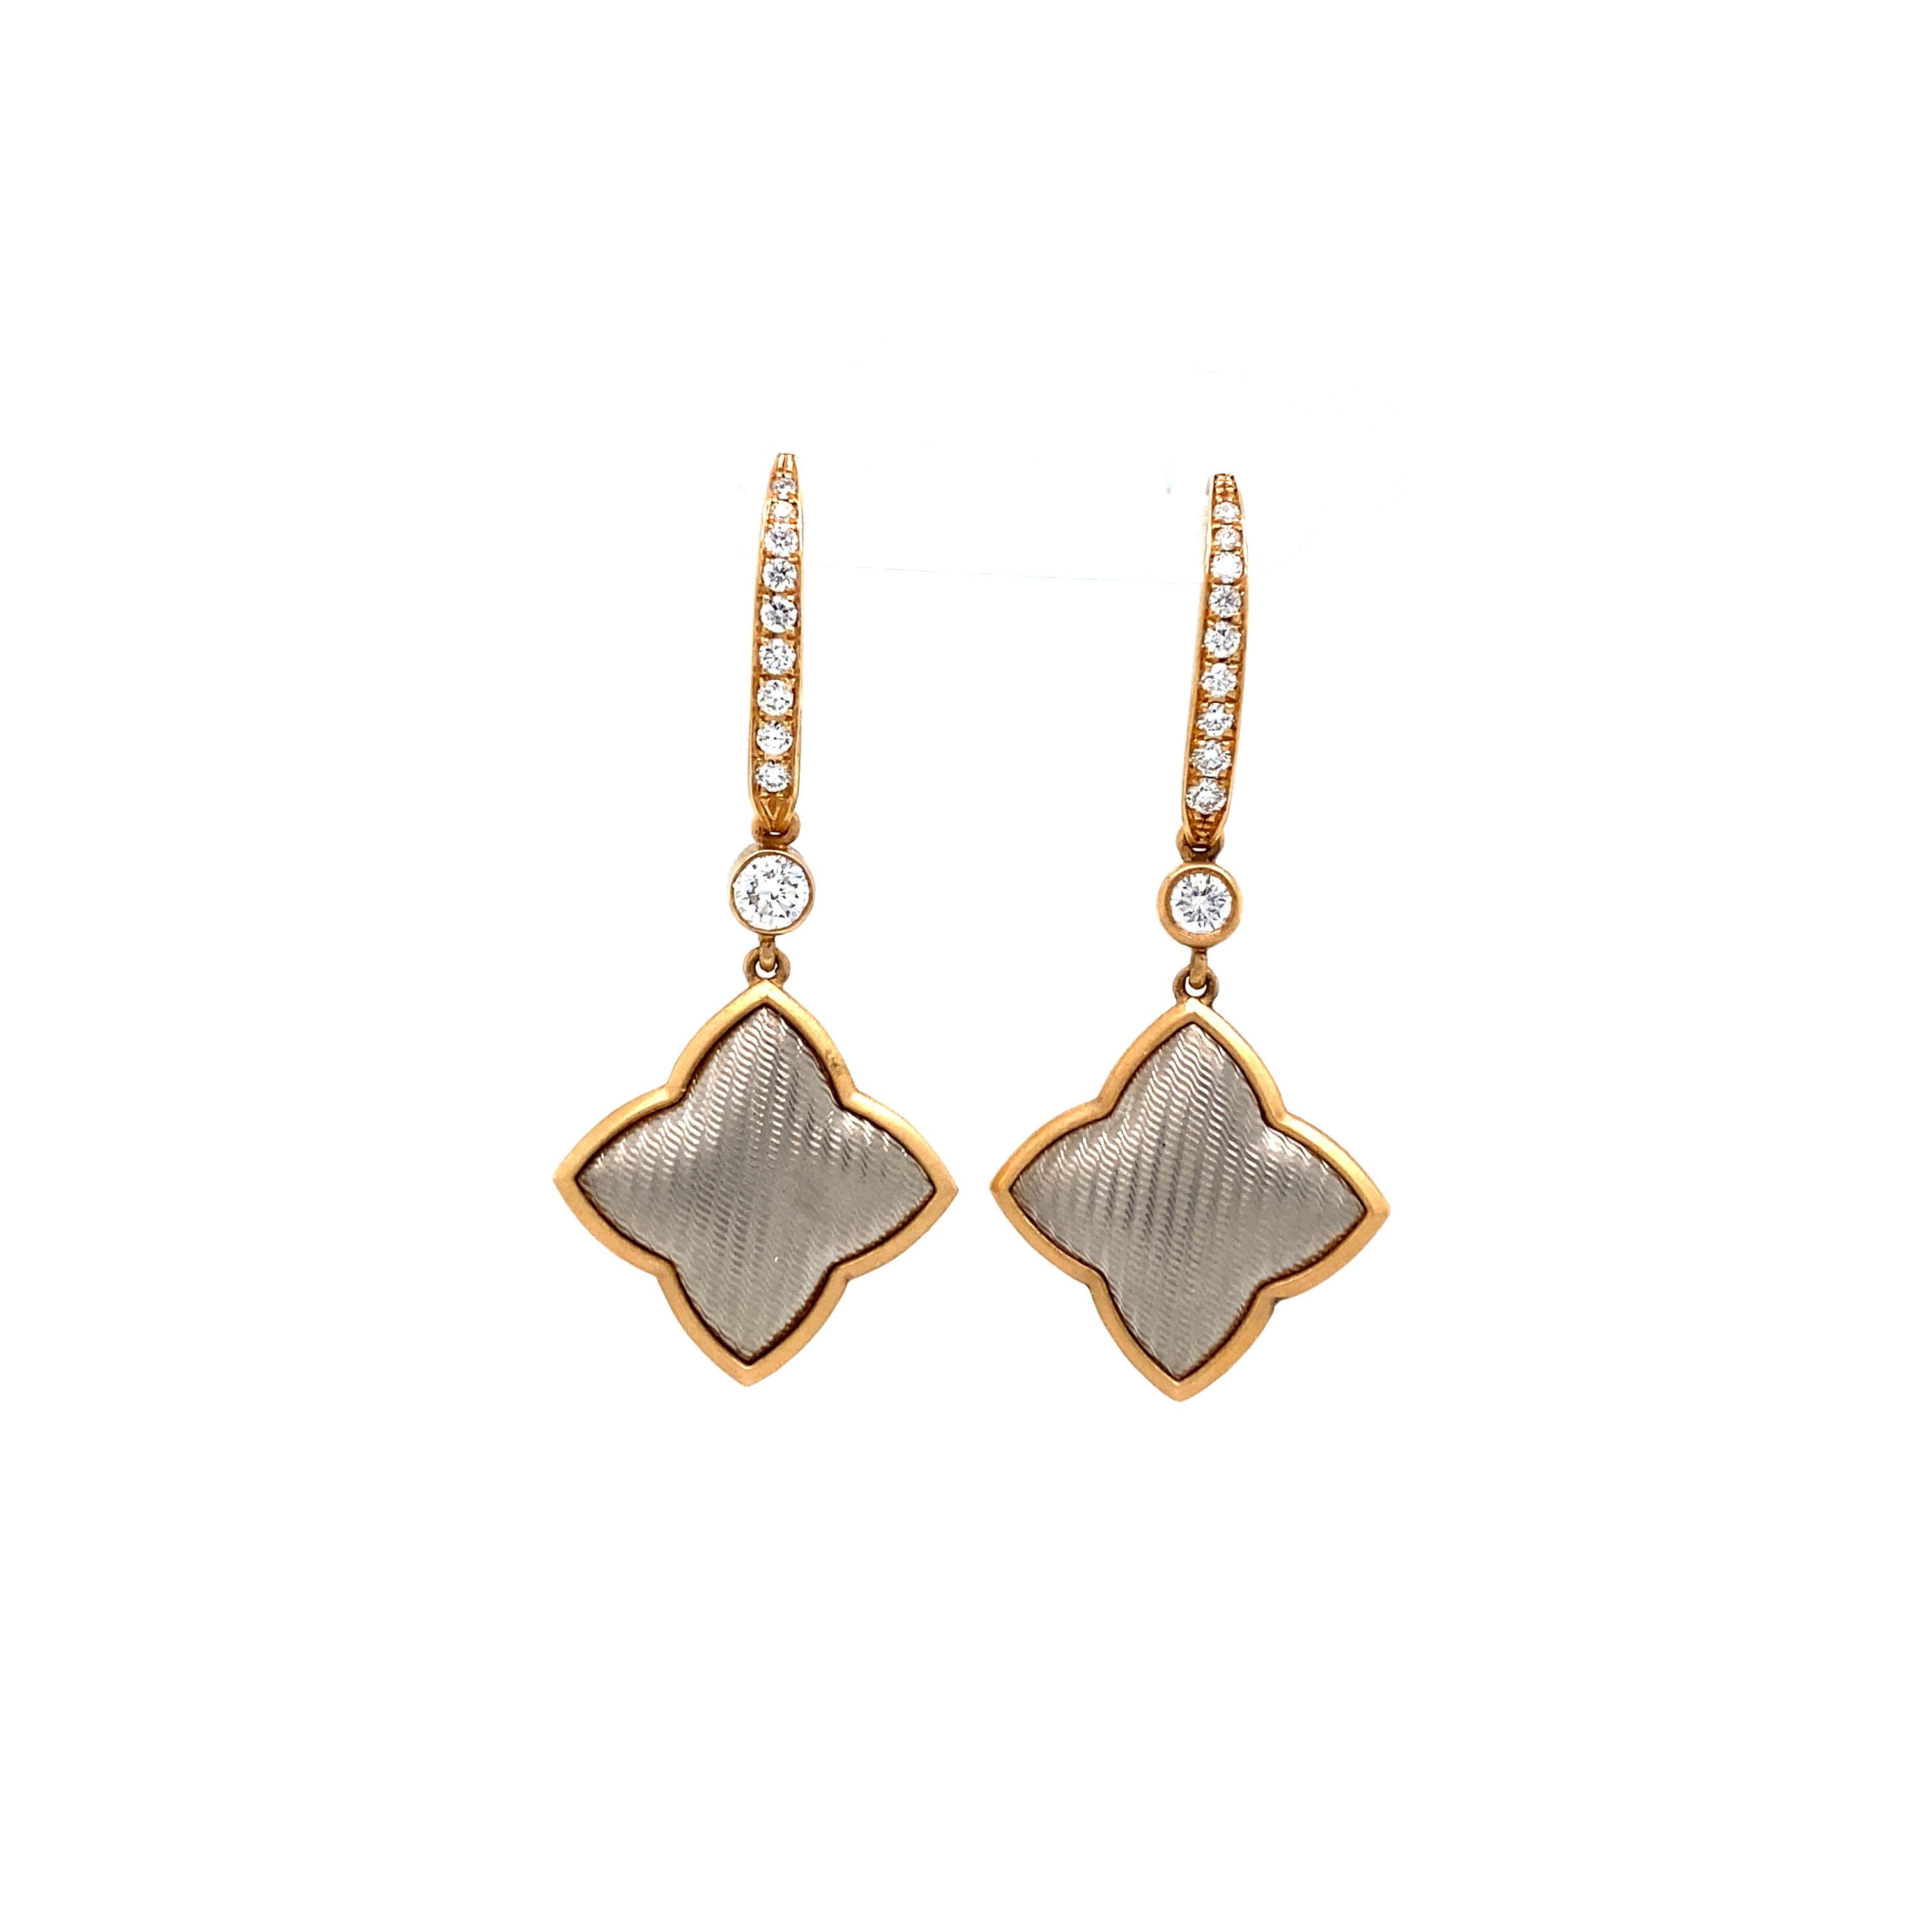 Victor Mayer structured pointed quatrefoil dangle earrings 18k rose gold and white gold, Eloise collection, 20 diamonds, total 0.27 ct, G VS, brilliant cut, height app. 36.0 mm

About the creator Victor Mayer 
Victor Mayer is internationally